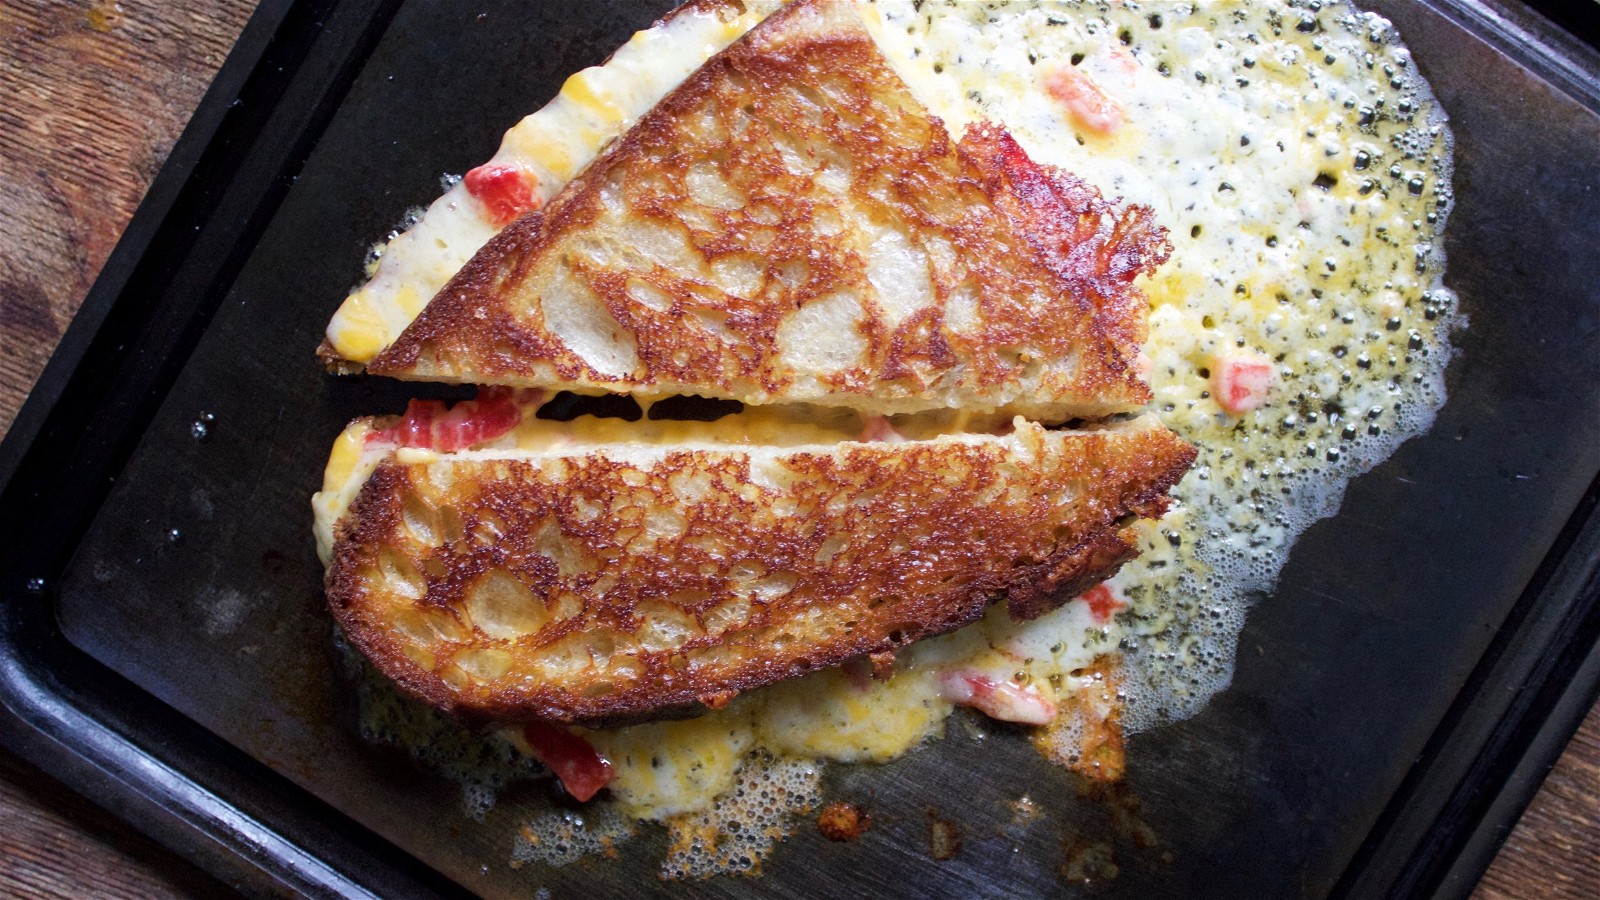 Image of Griddled Pimento Cheese Sandwich